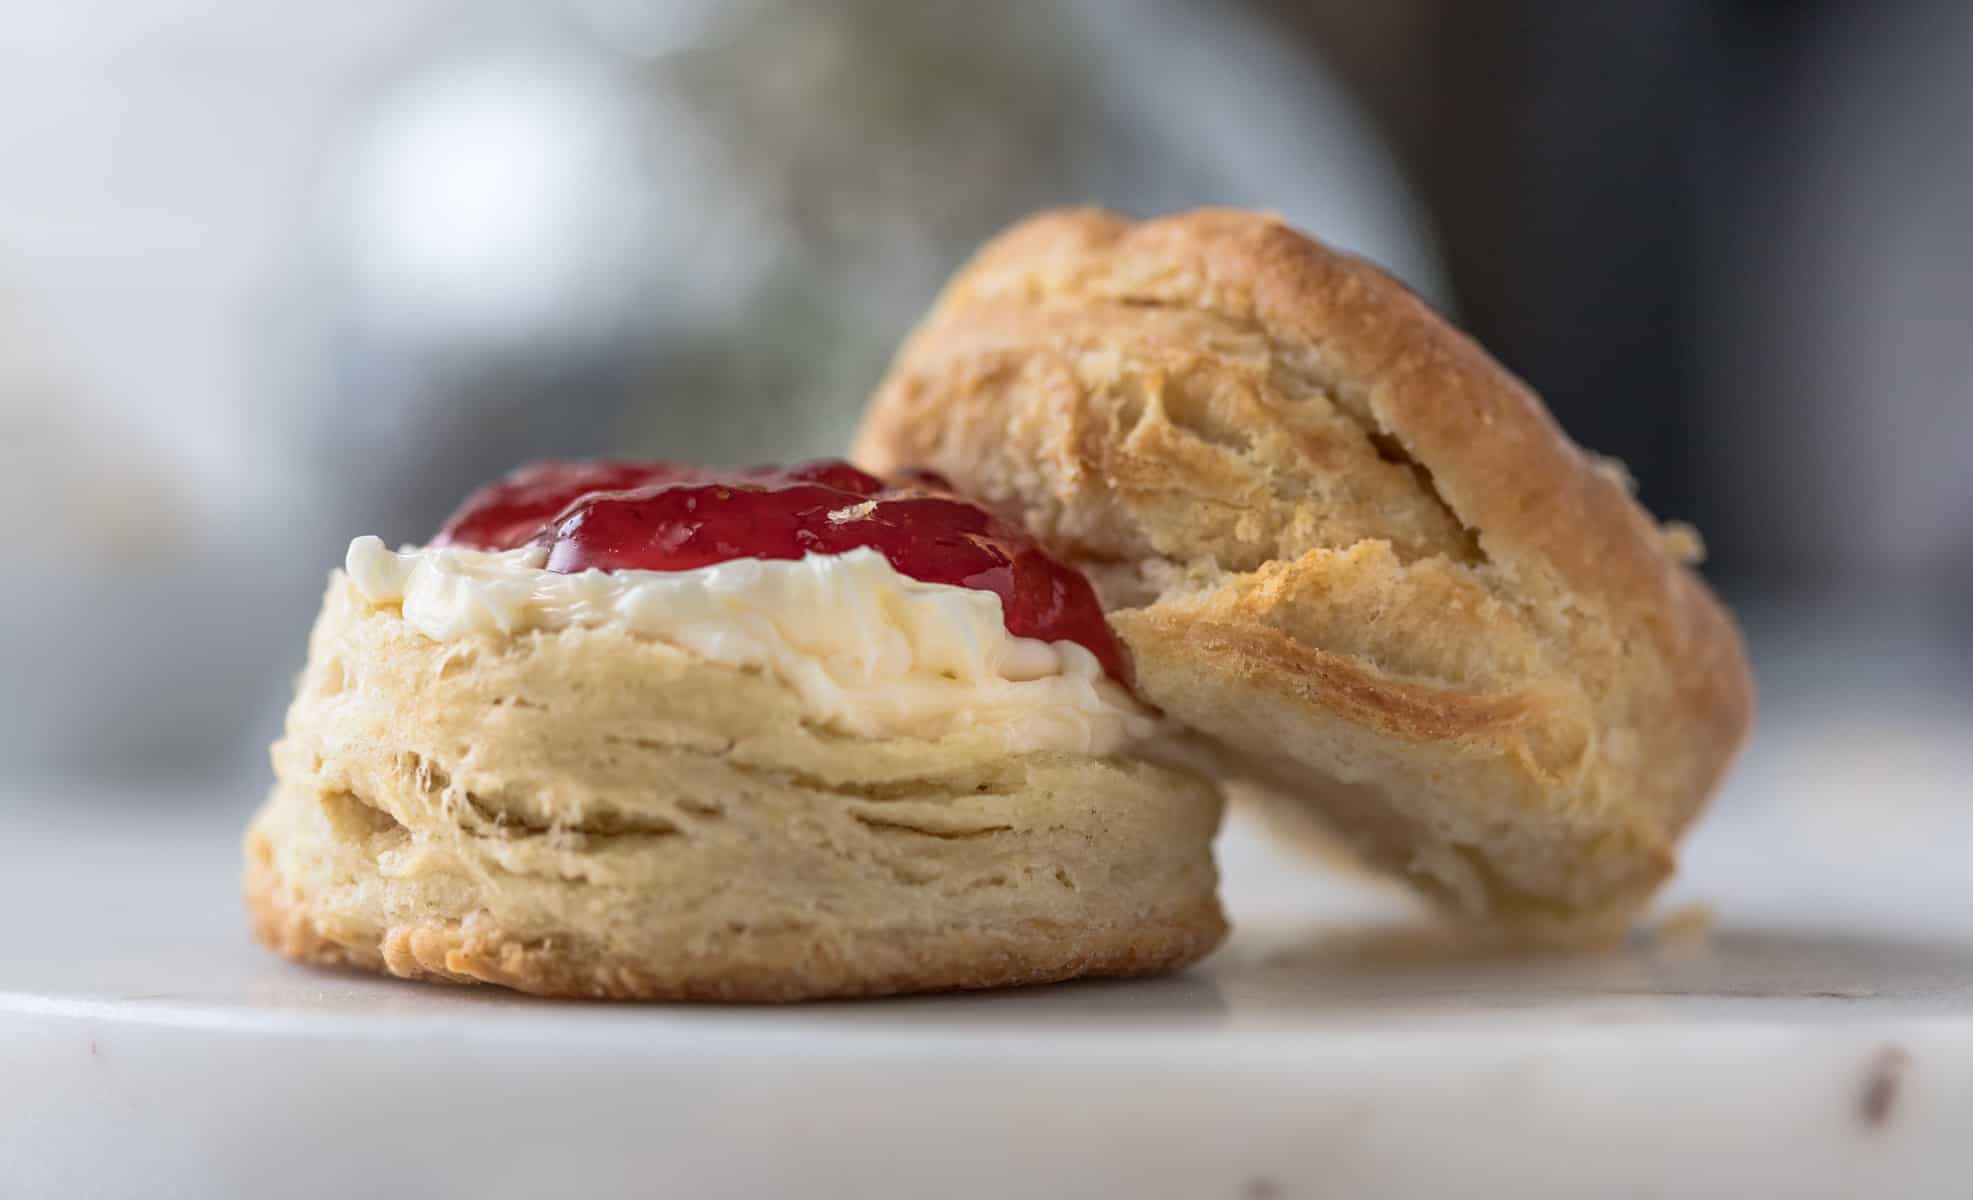 Flaky, fluffy vegan biscuit split in half and slathered with butter and jam.